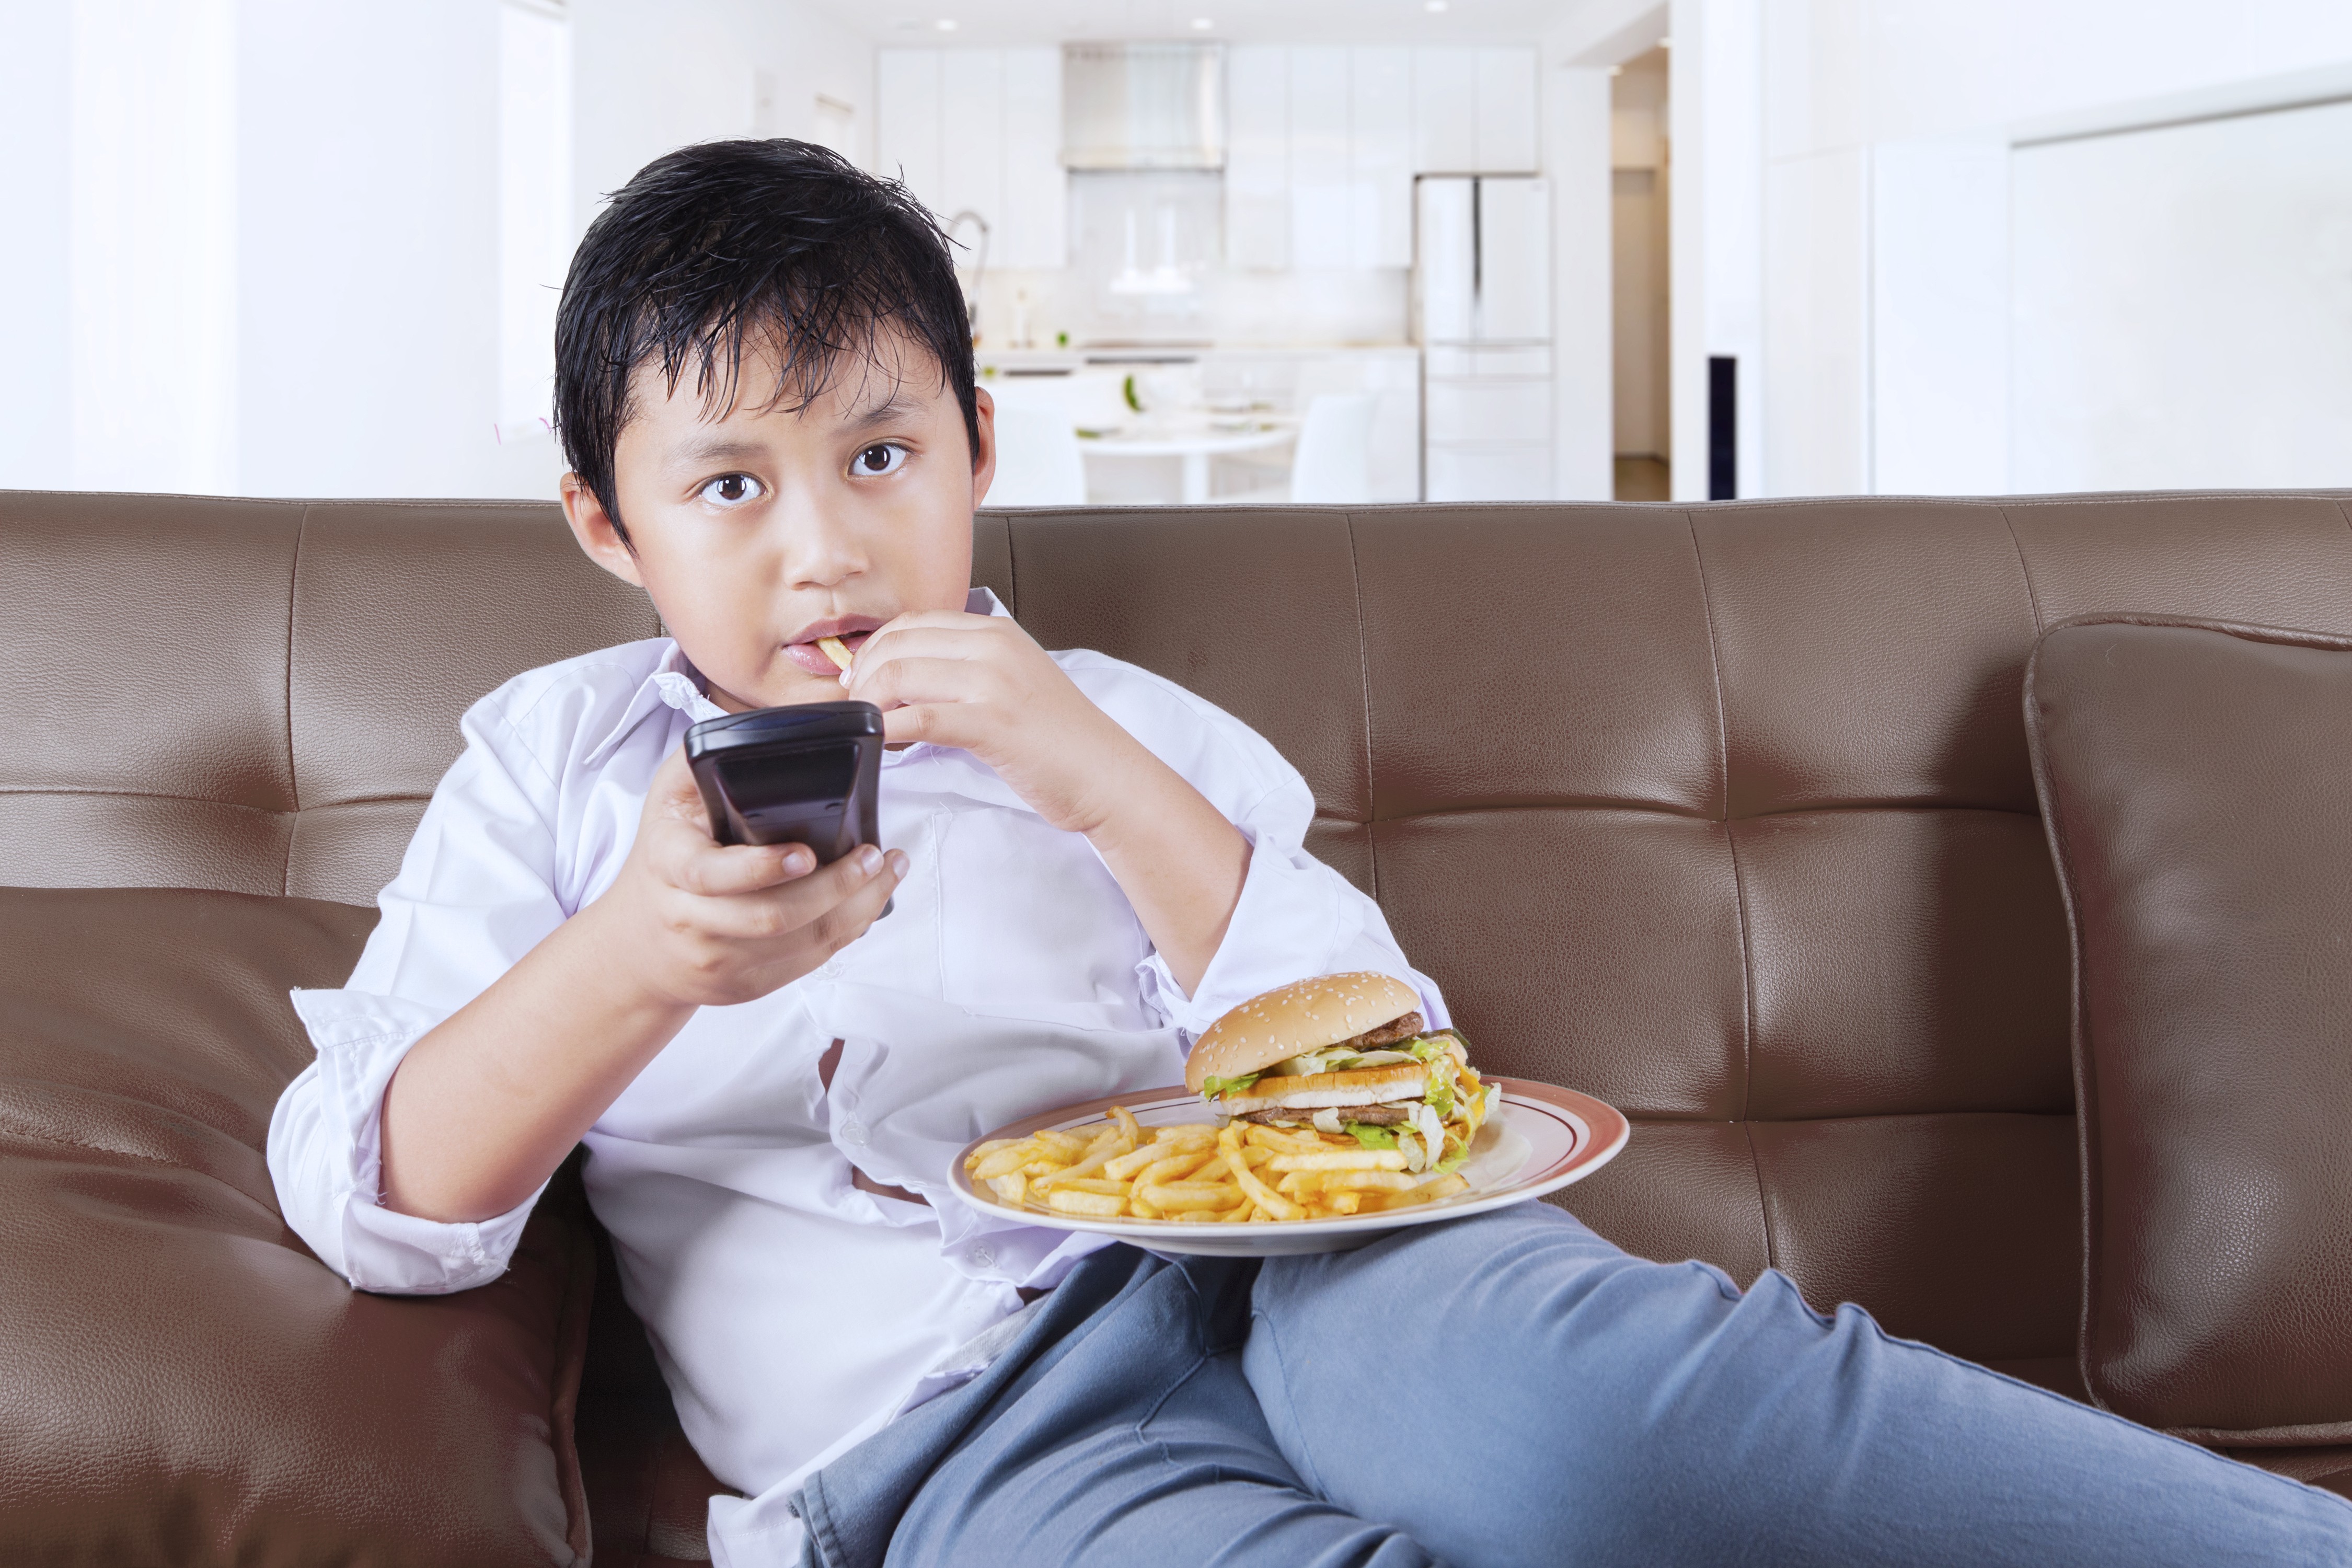 Junk food, sedentary lifestyles and not concentrating on what’s on the plate – add emotional eating to the mix and the potential for problems is vast.